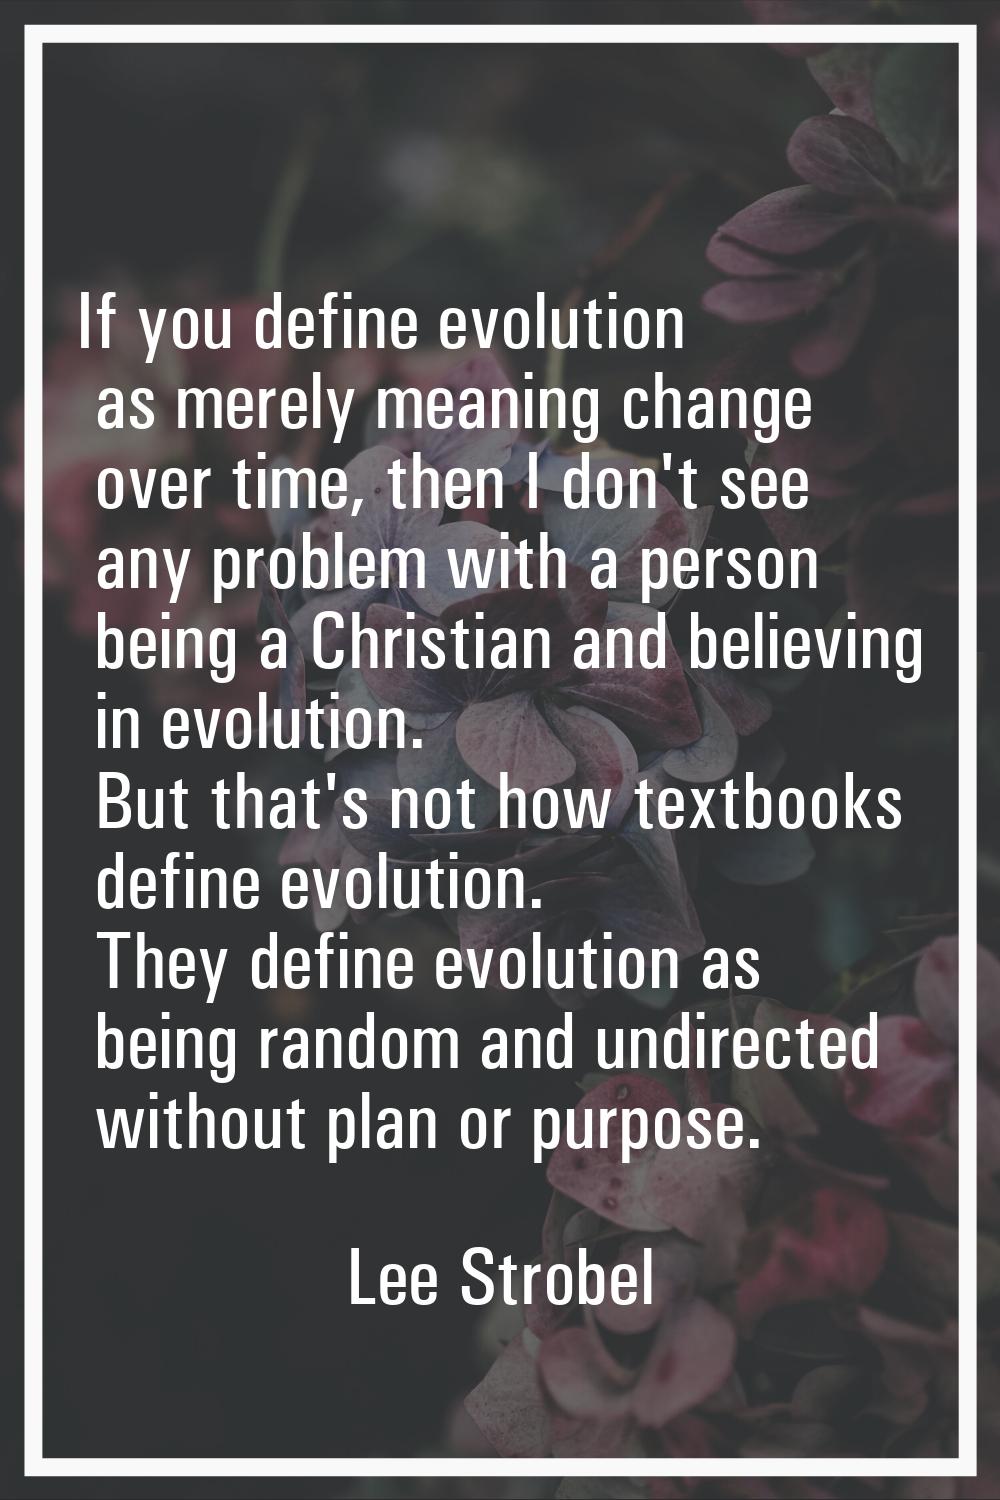 If you define evolution as merely meaning change over time, then I don't see any problem with a per